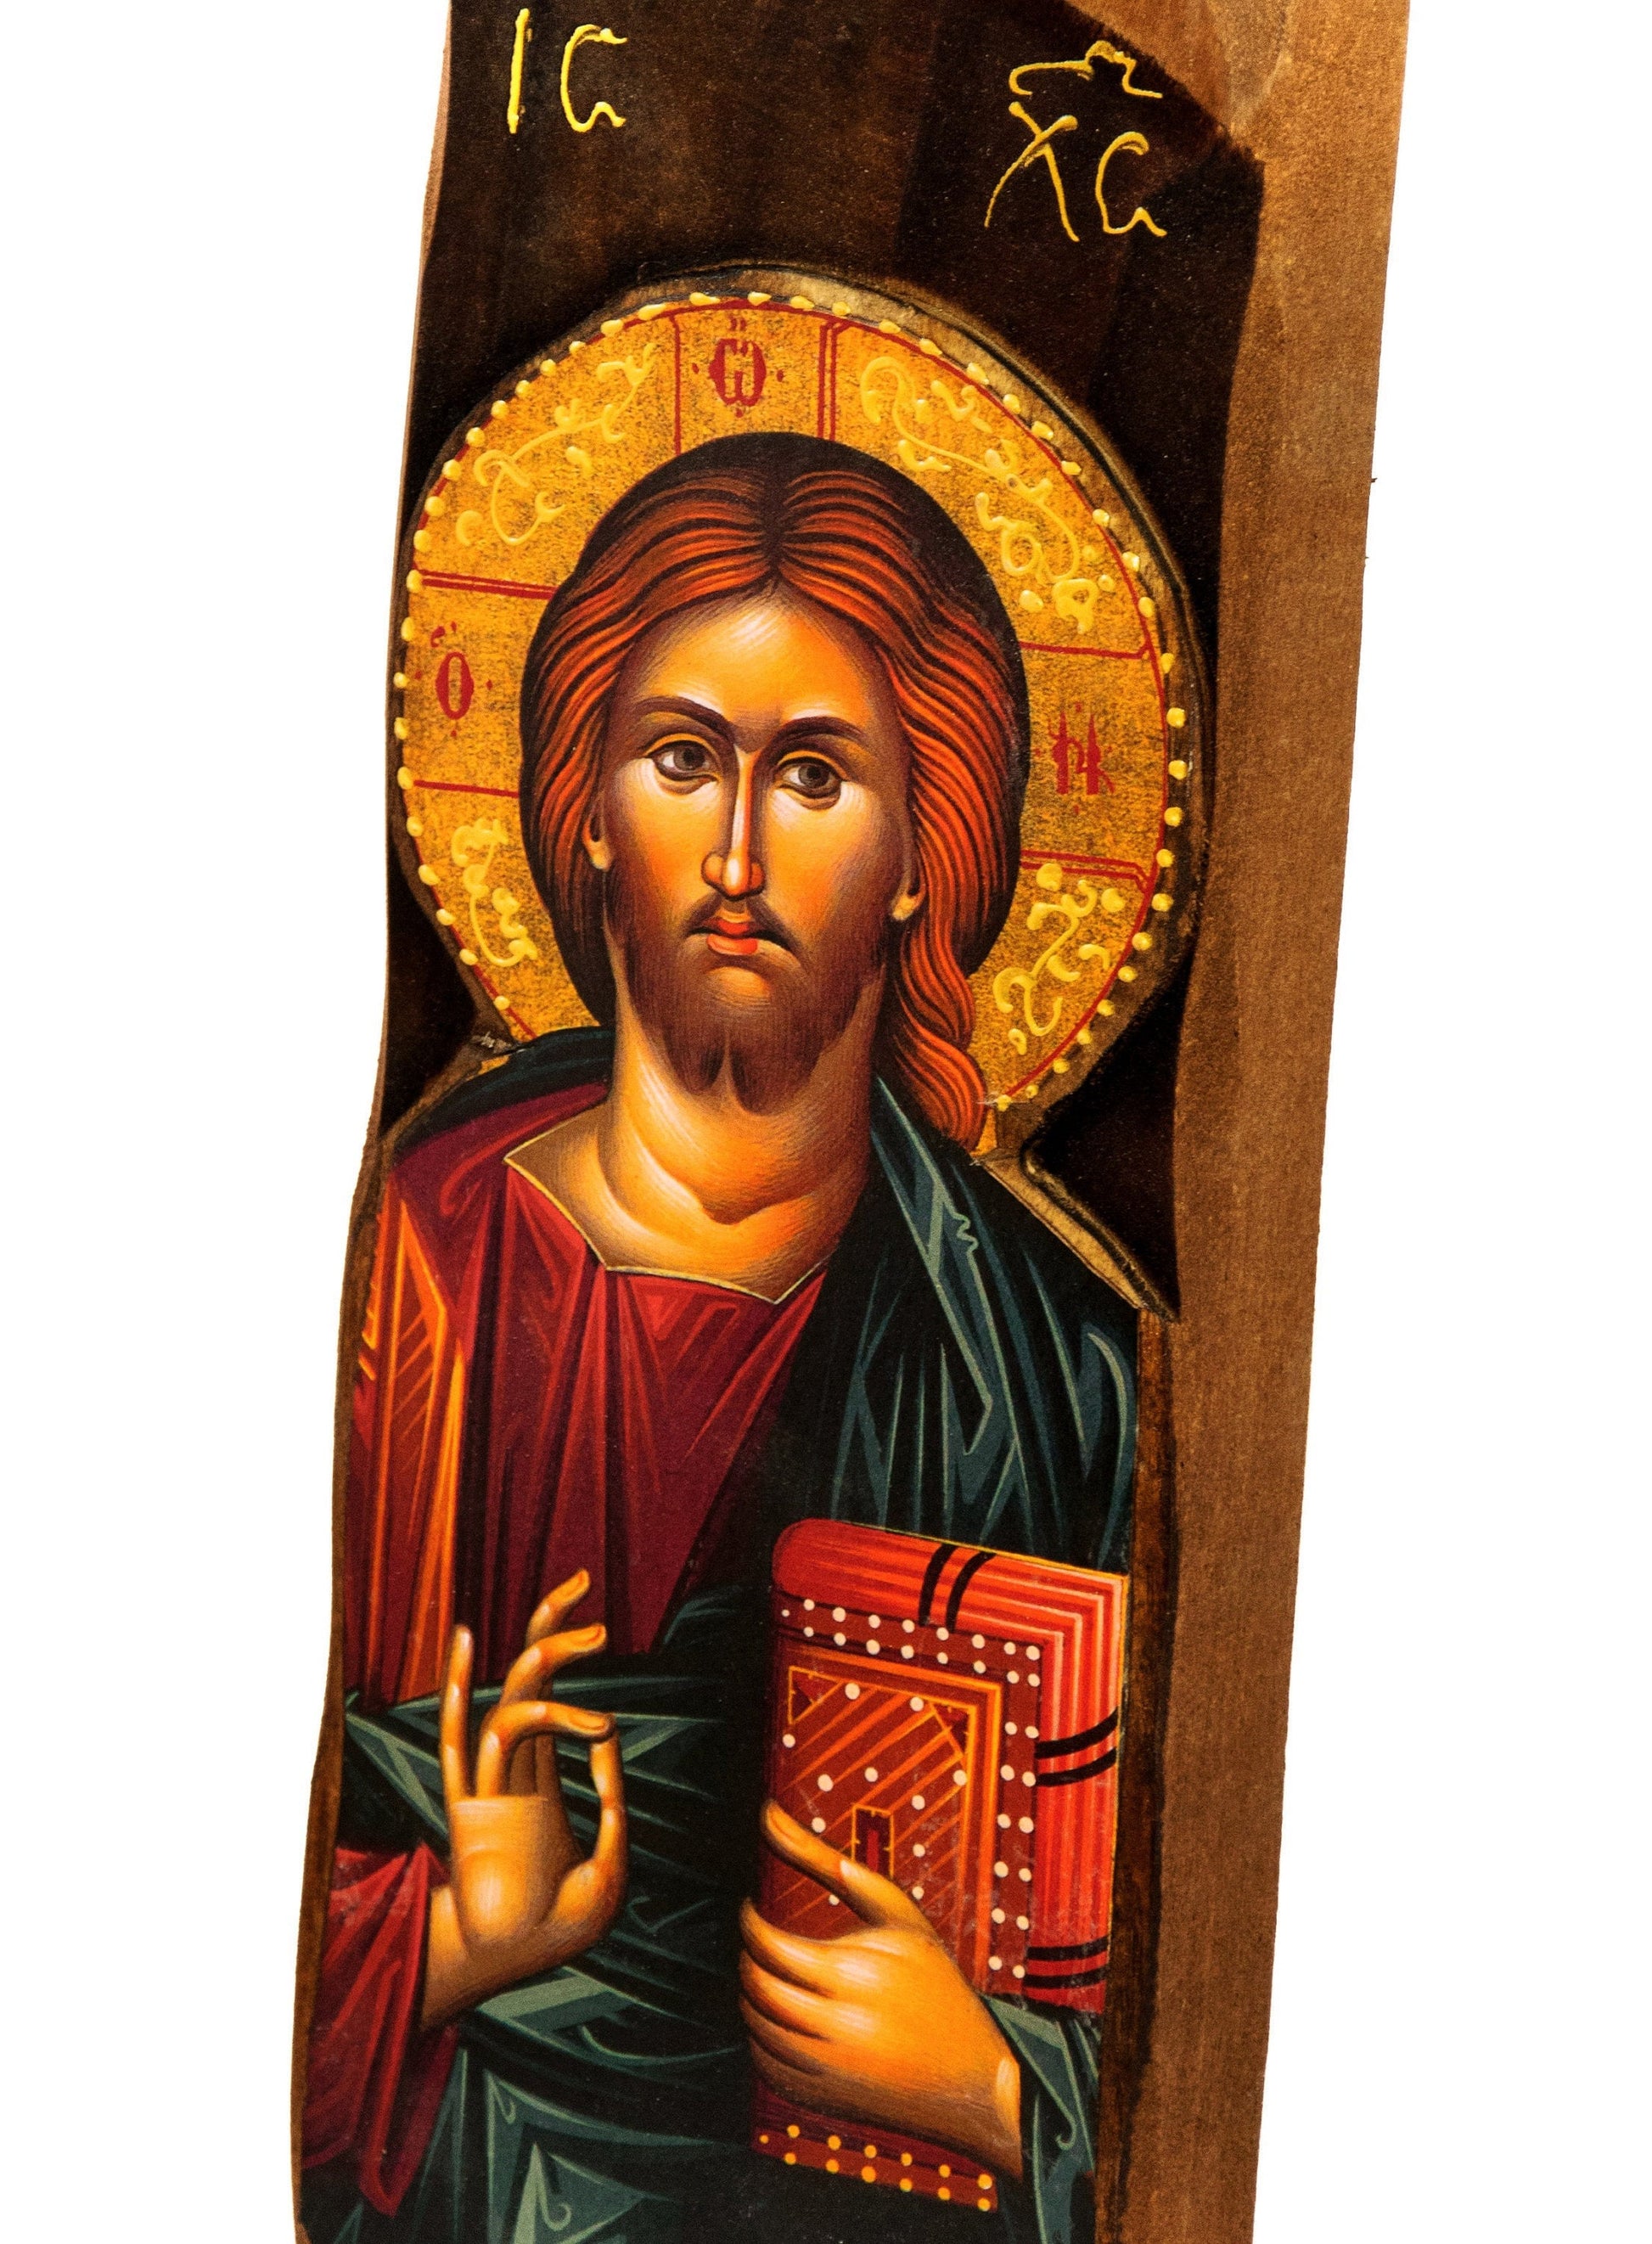 Jesus Christ icon, Handmade Greek Orthodox icon, Byzantine art wall hanging icon of our Lord on wood plaque, wedding gift ideas TheHolyArt